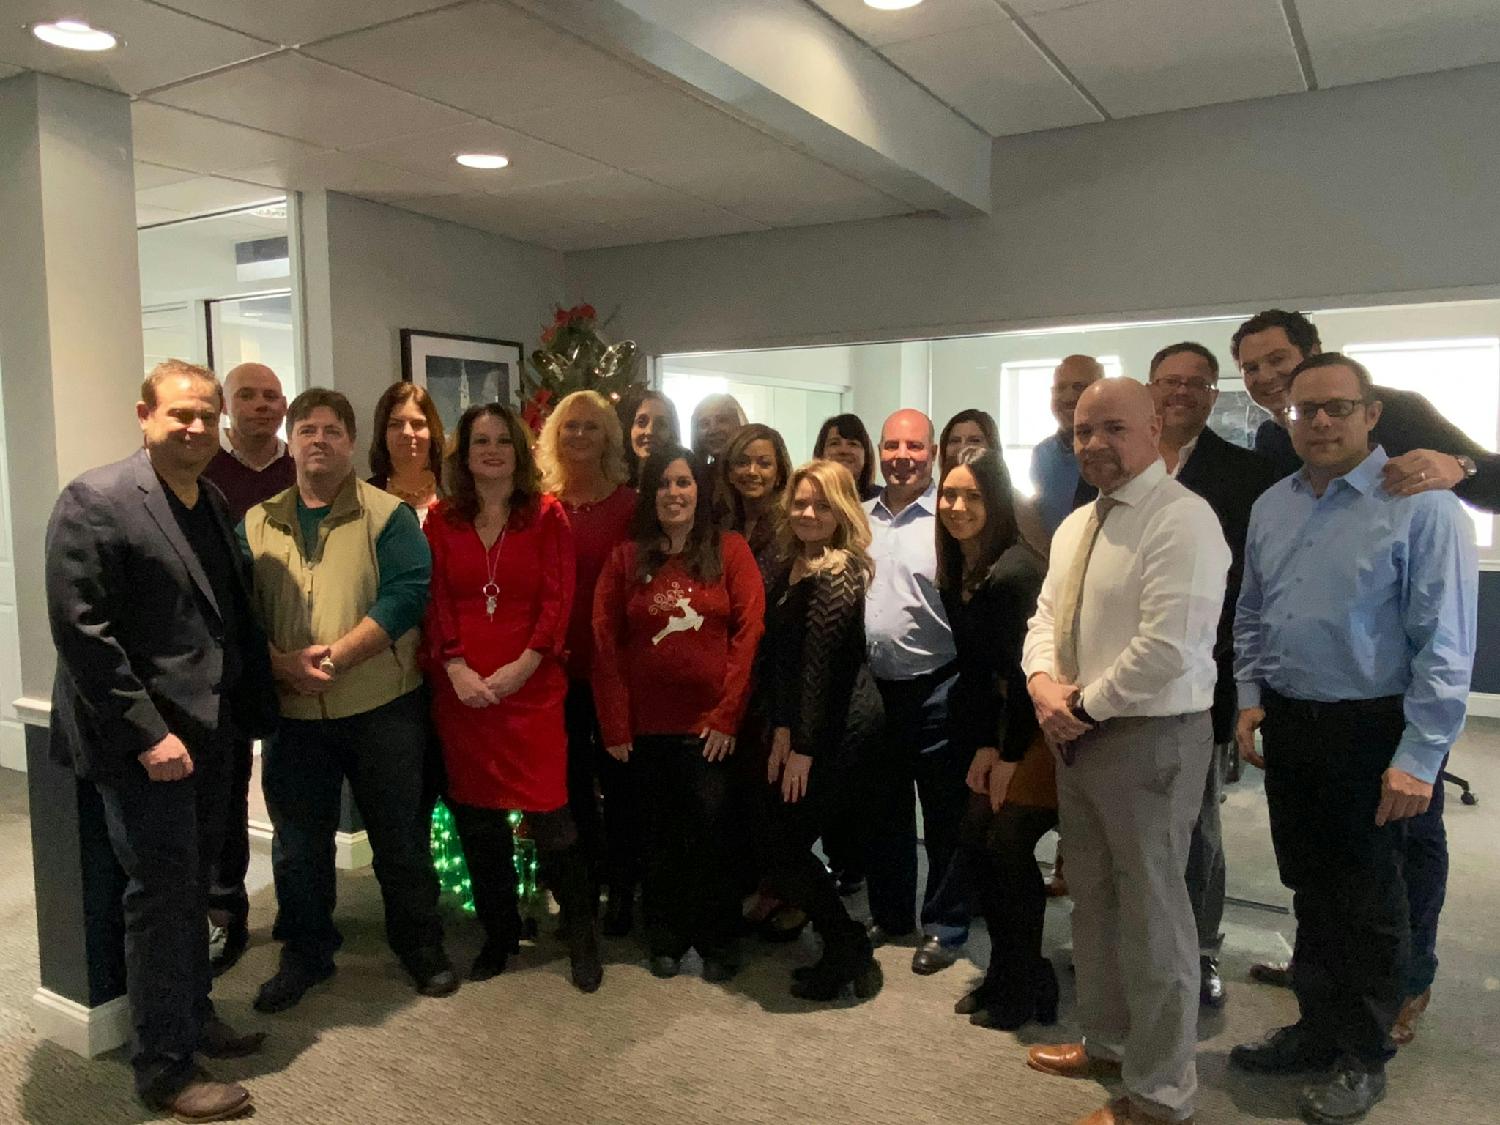 Executive leaders Tom George and Chris Jones celebrate the holidays with branch employees in Rhode Island.